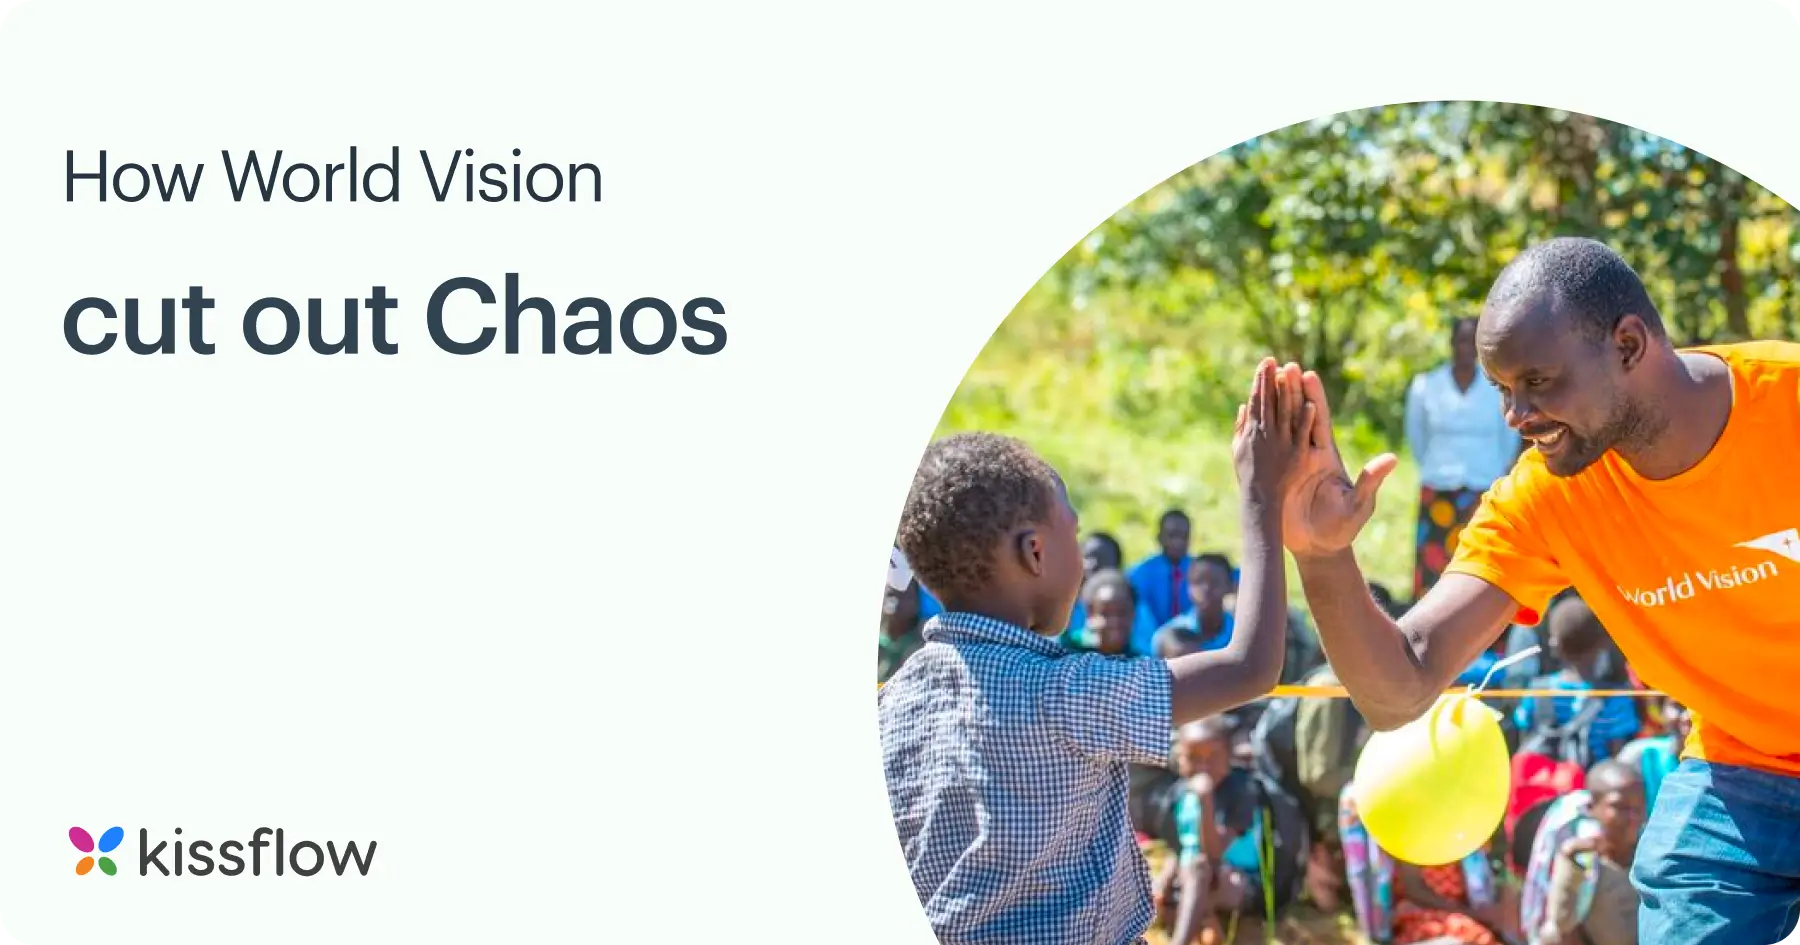 How World Vision cut out Chaos